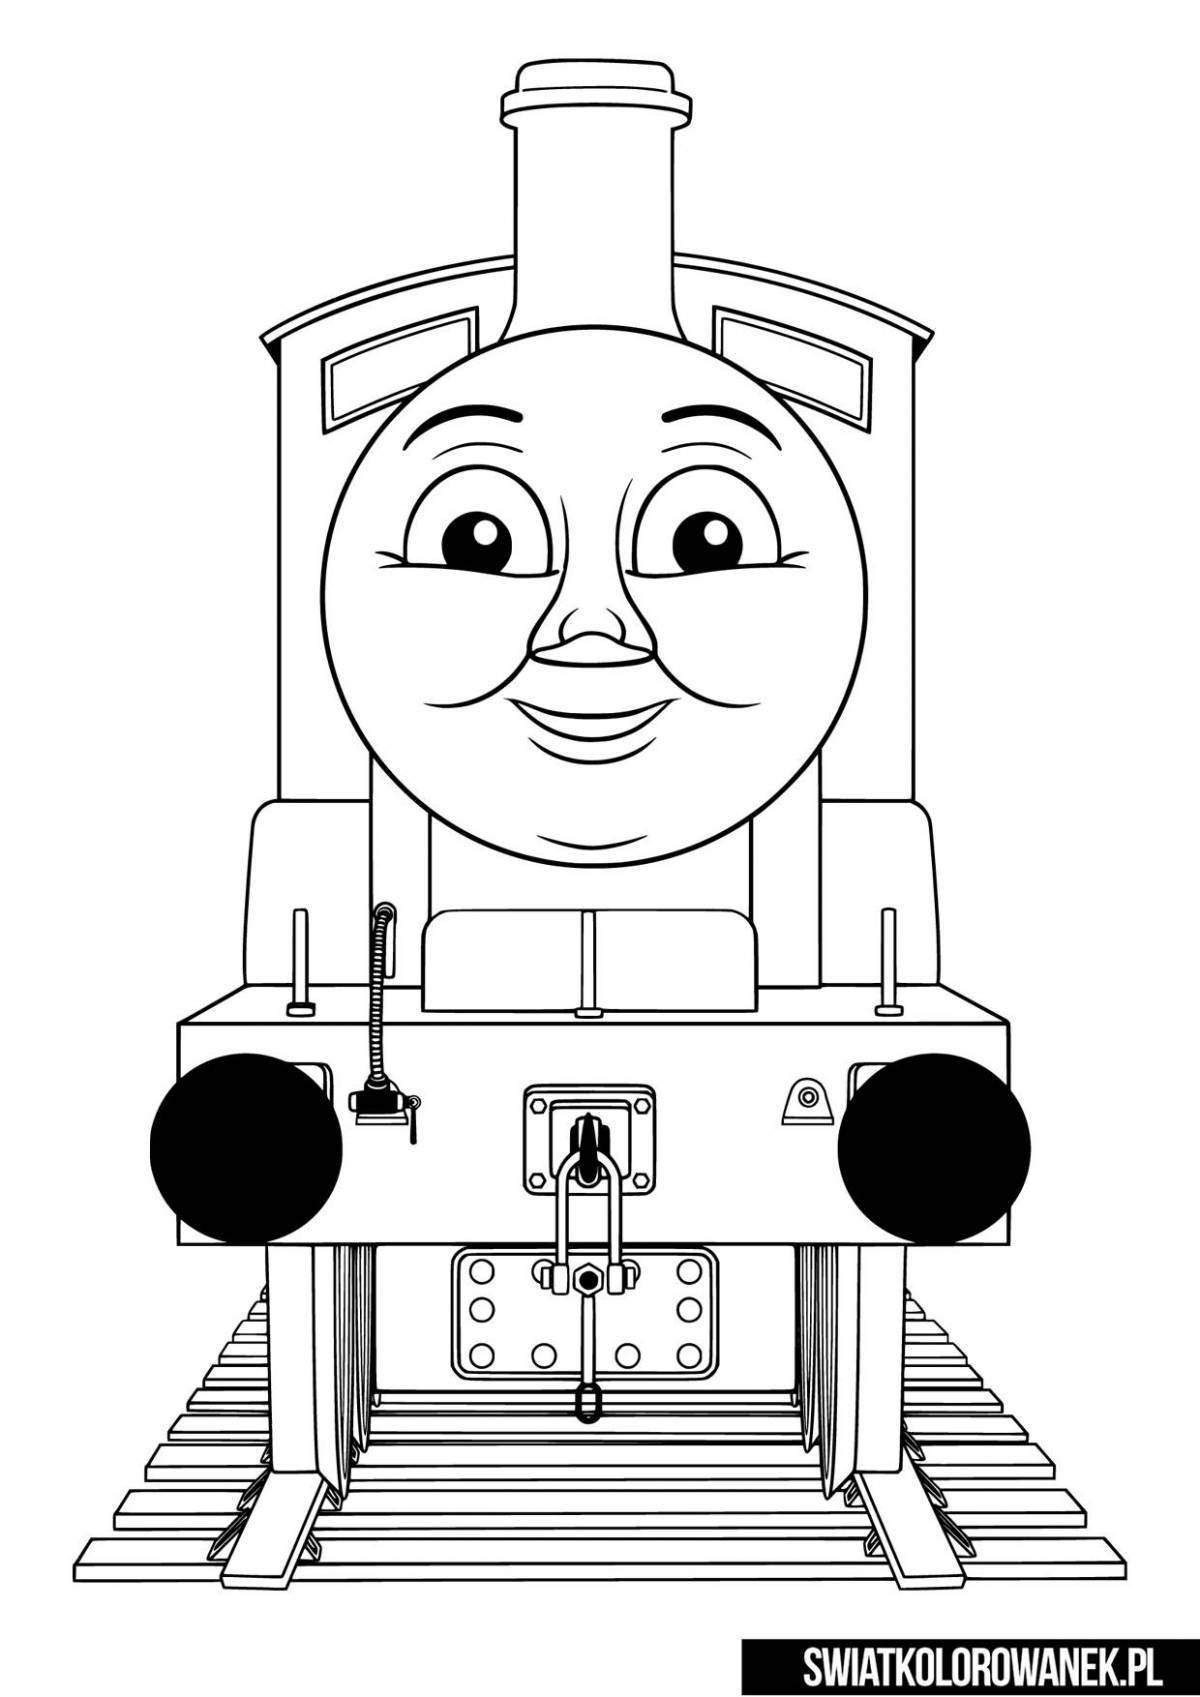 Thomas Exek's colorful coloring page